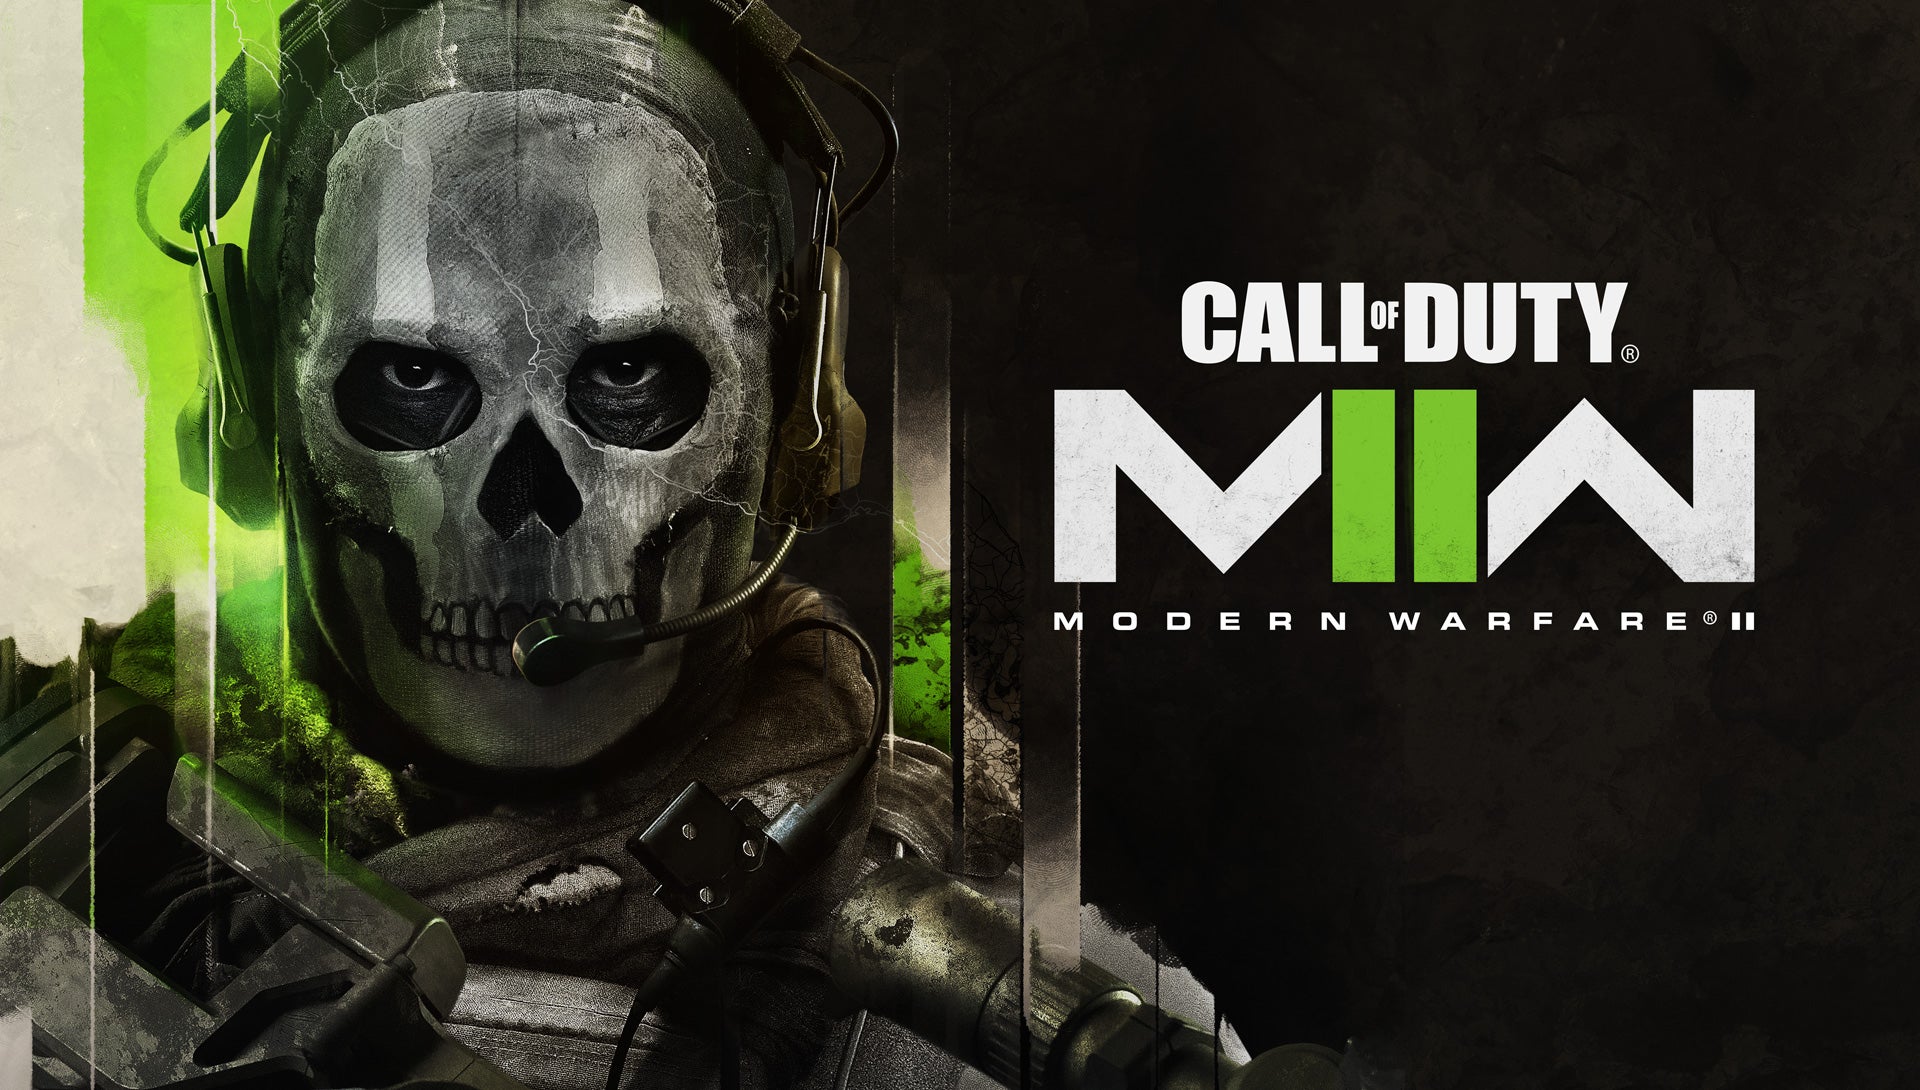 Image for Call of Duty: Modern Warfare 2 release date set for October 28